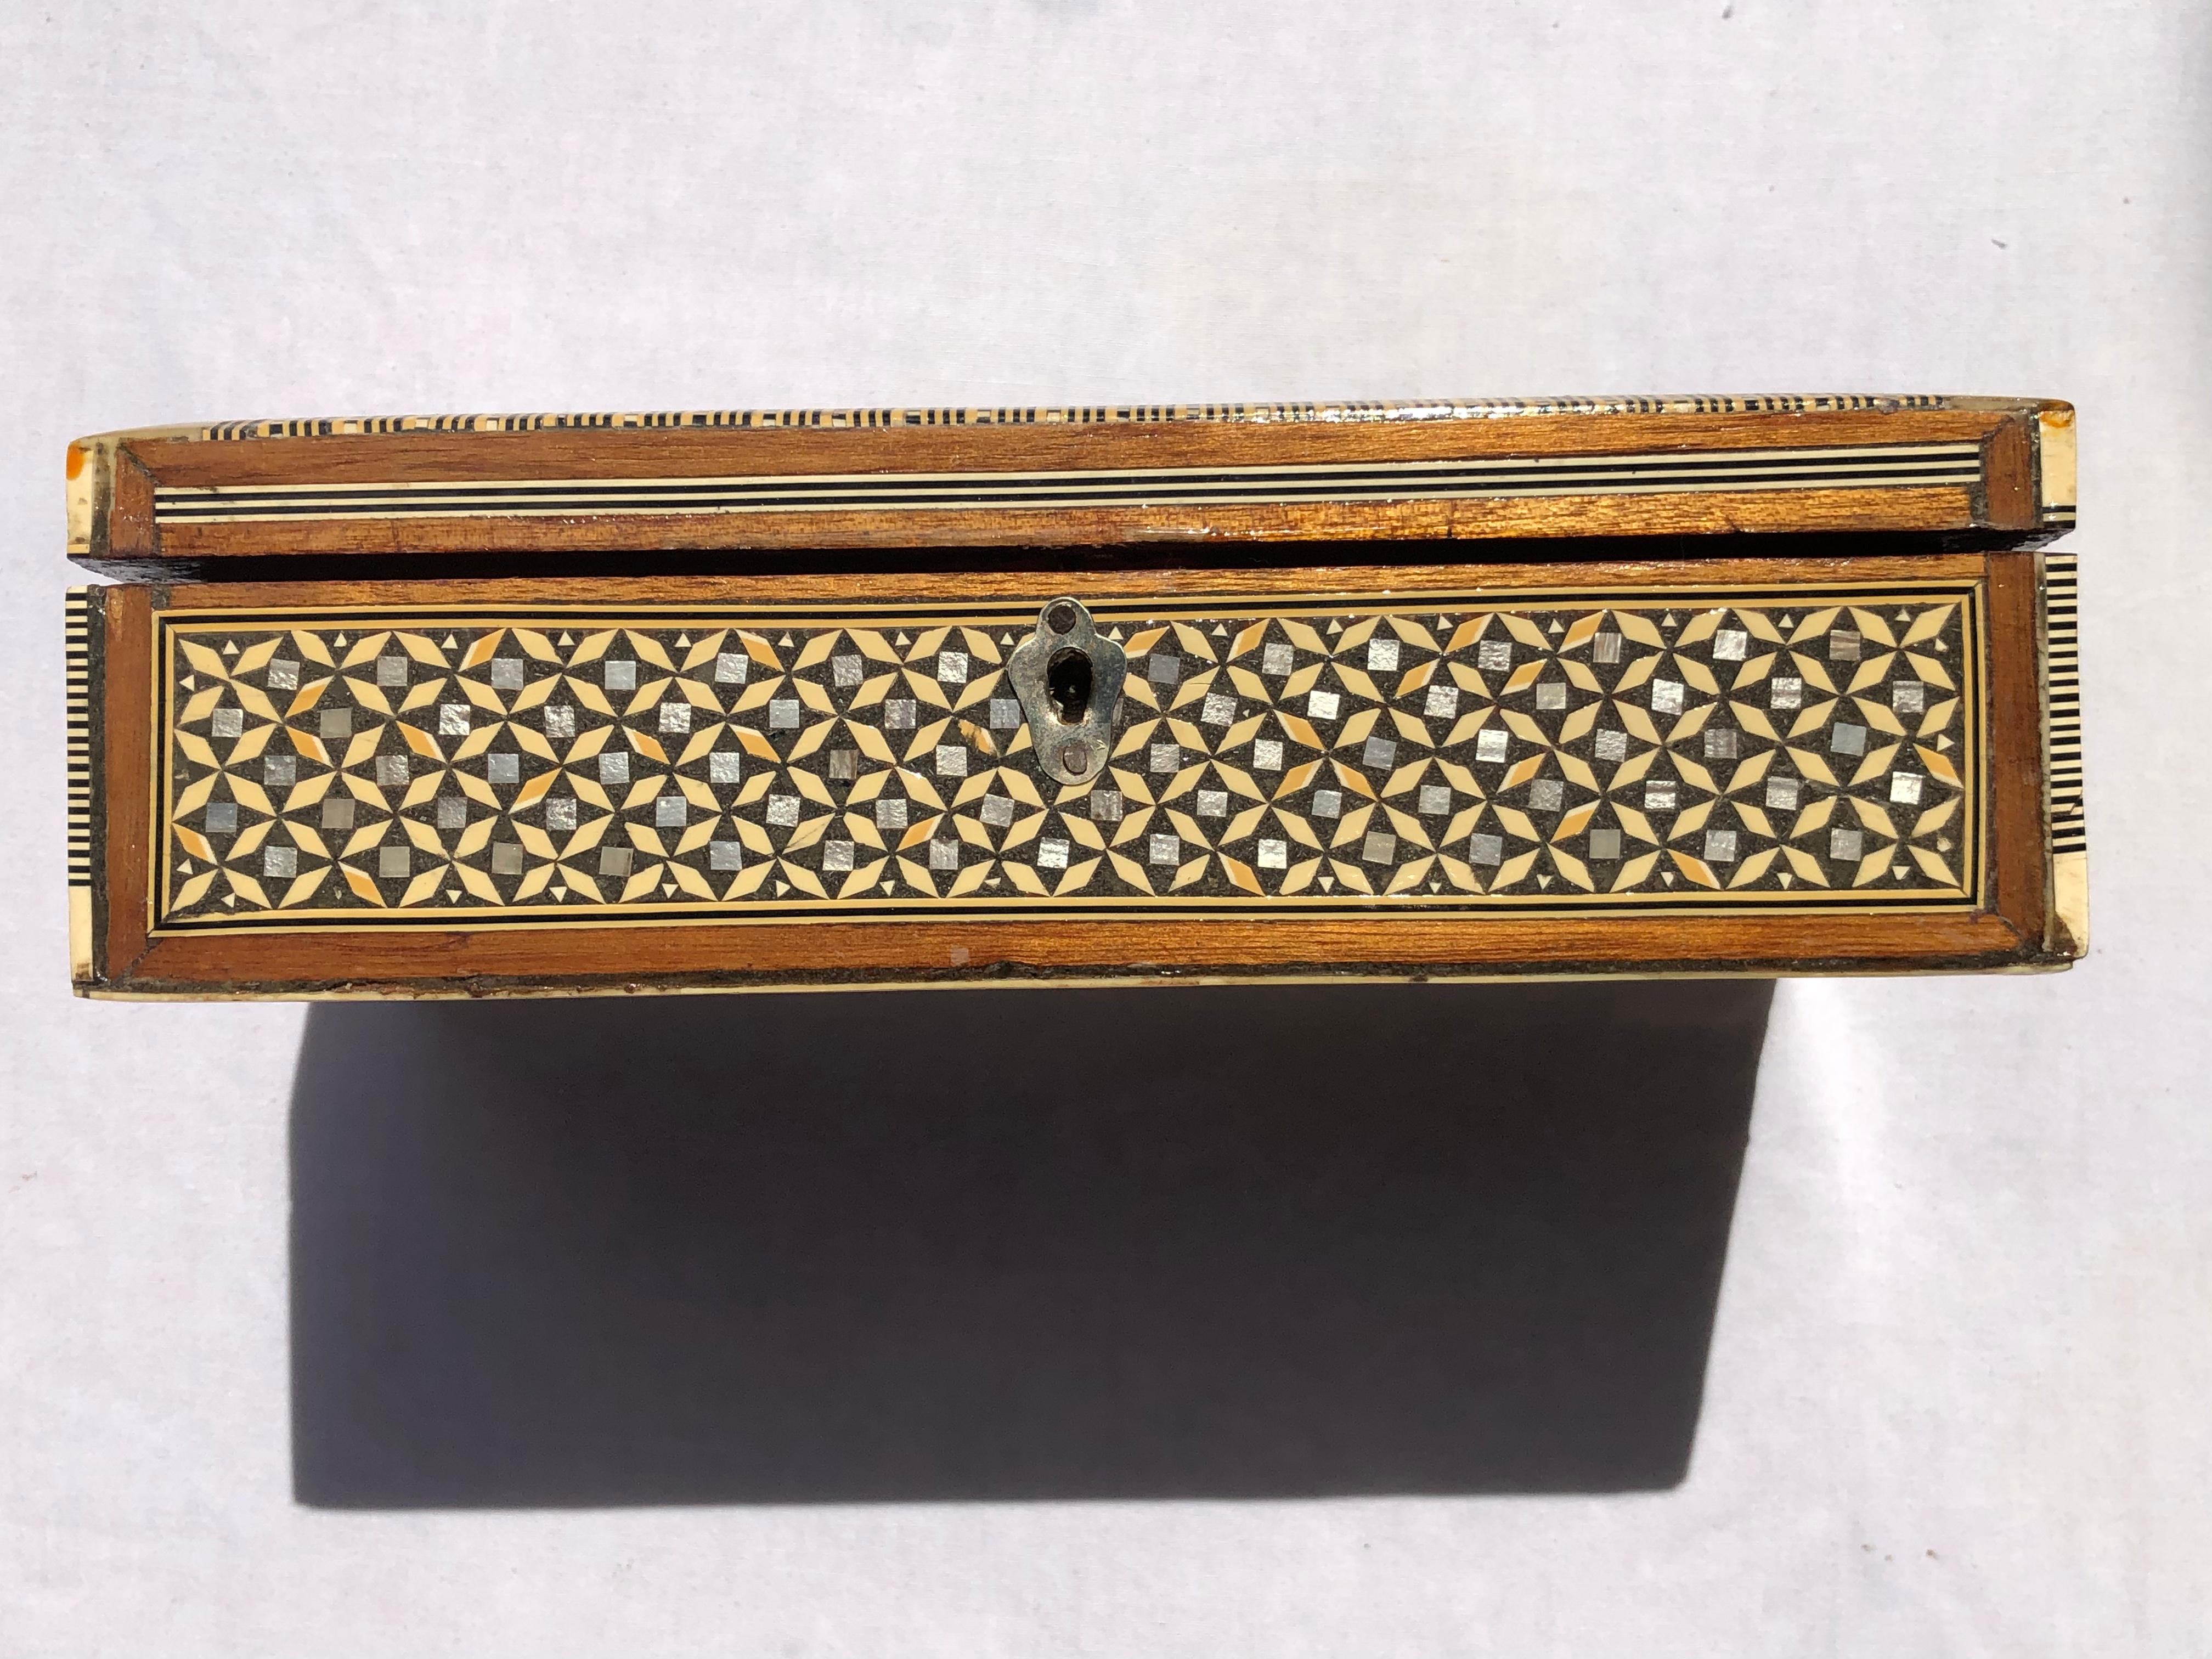 One of a kind, exquisite middle Eastern Moorish Syrian inlay jewelry box. This box is intricately inlaid with Moorish motif designs which have been uniquely inlaid with bone, mother of pearl and fruitwood.

This Jewelry box’s interior is lined